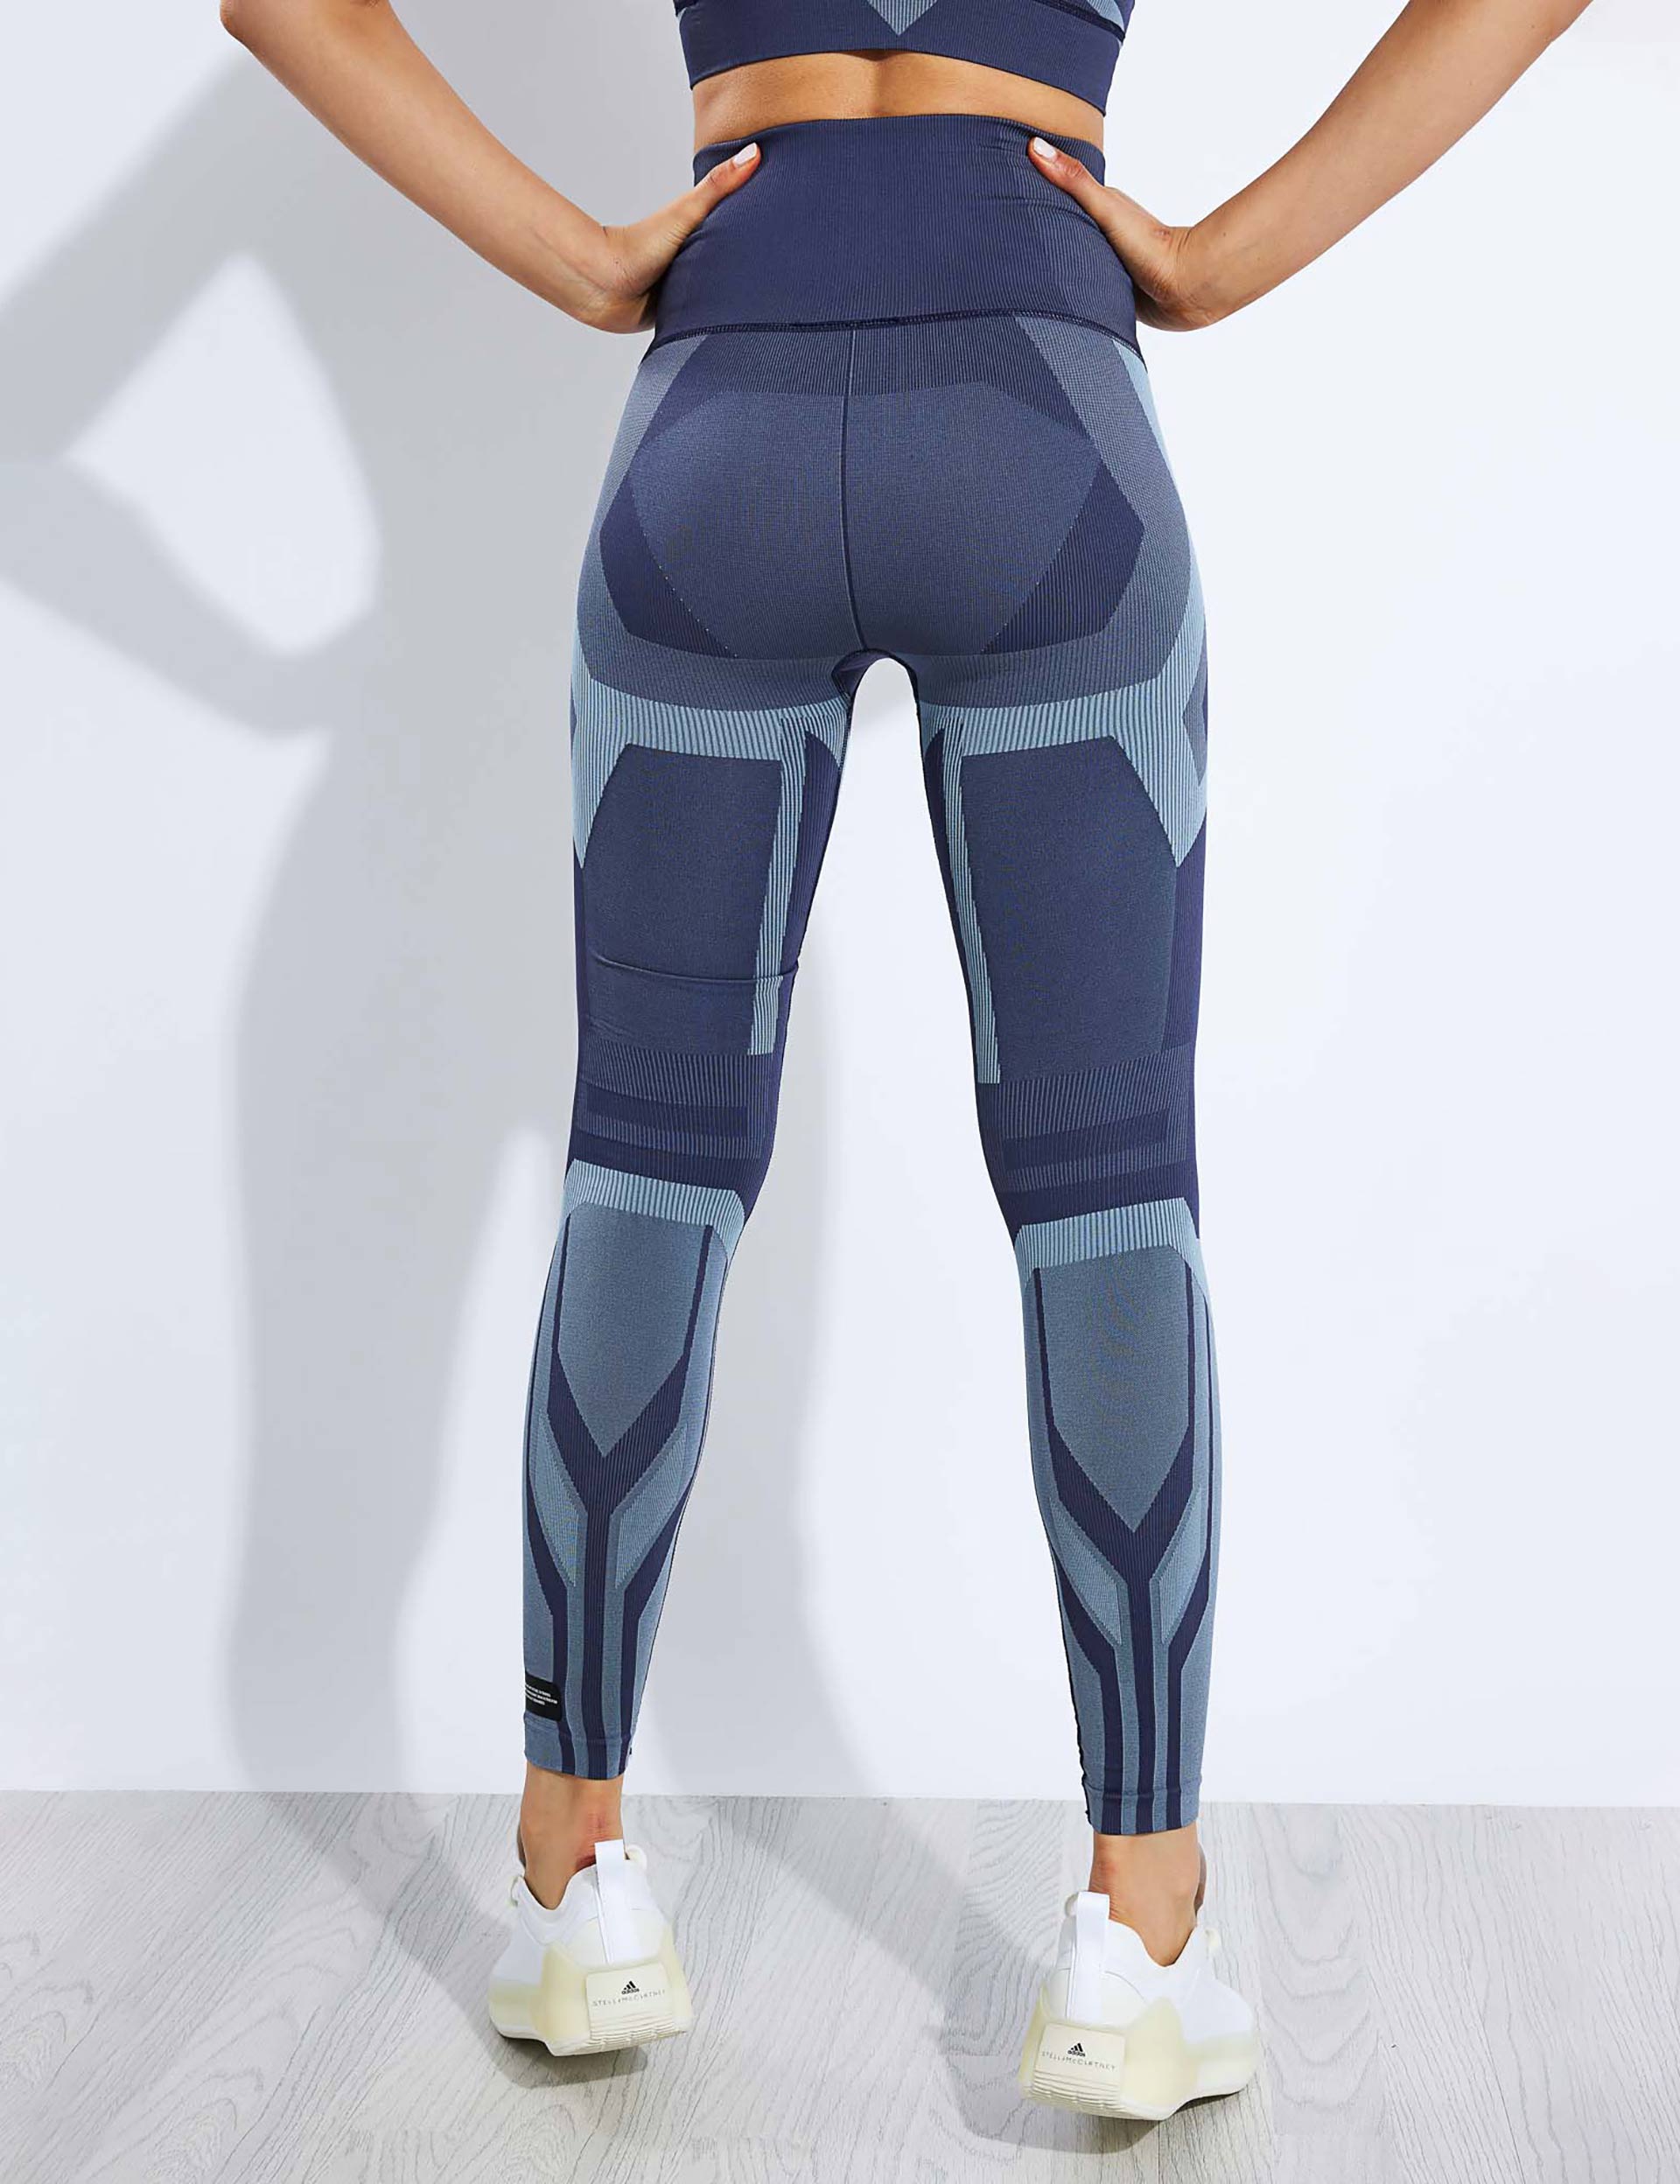 Adidas Formotion Sculpt Two-Tone Tights - Shadow Navy/Magic Greyimage3- The Sports Edit